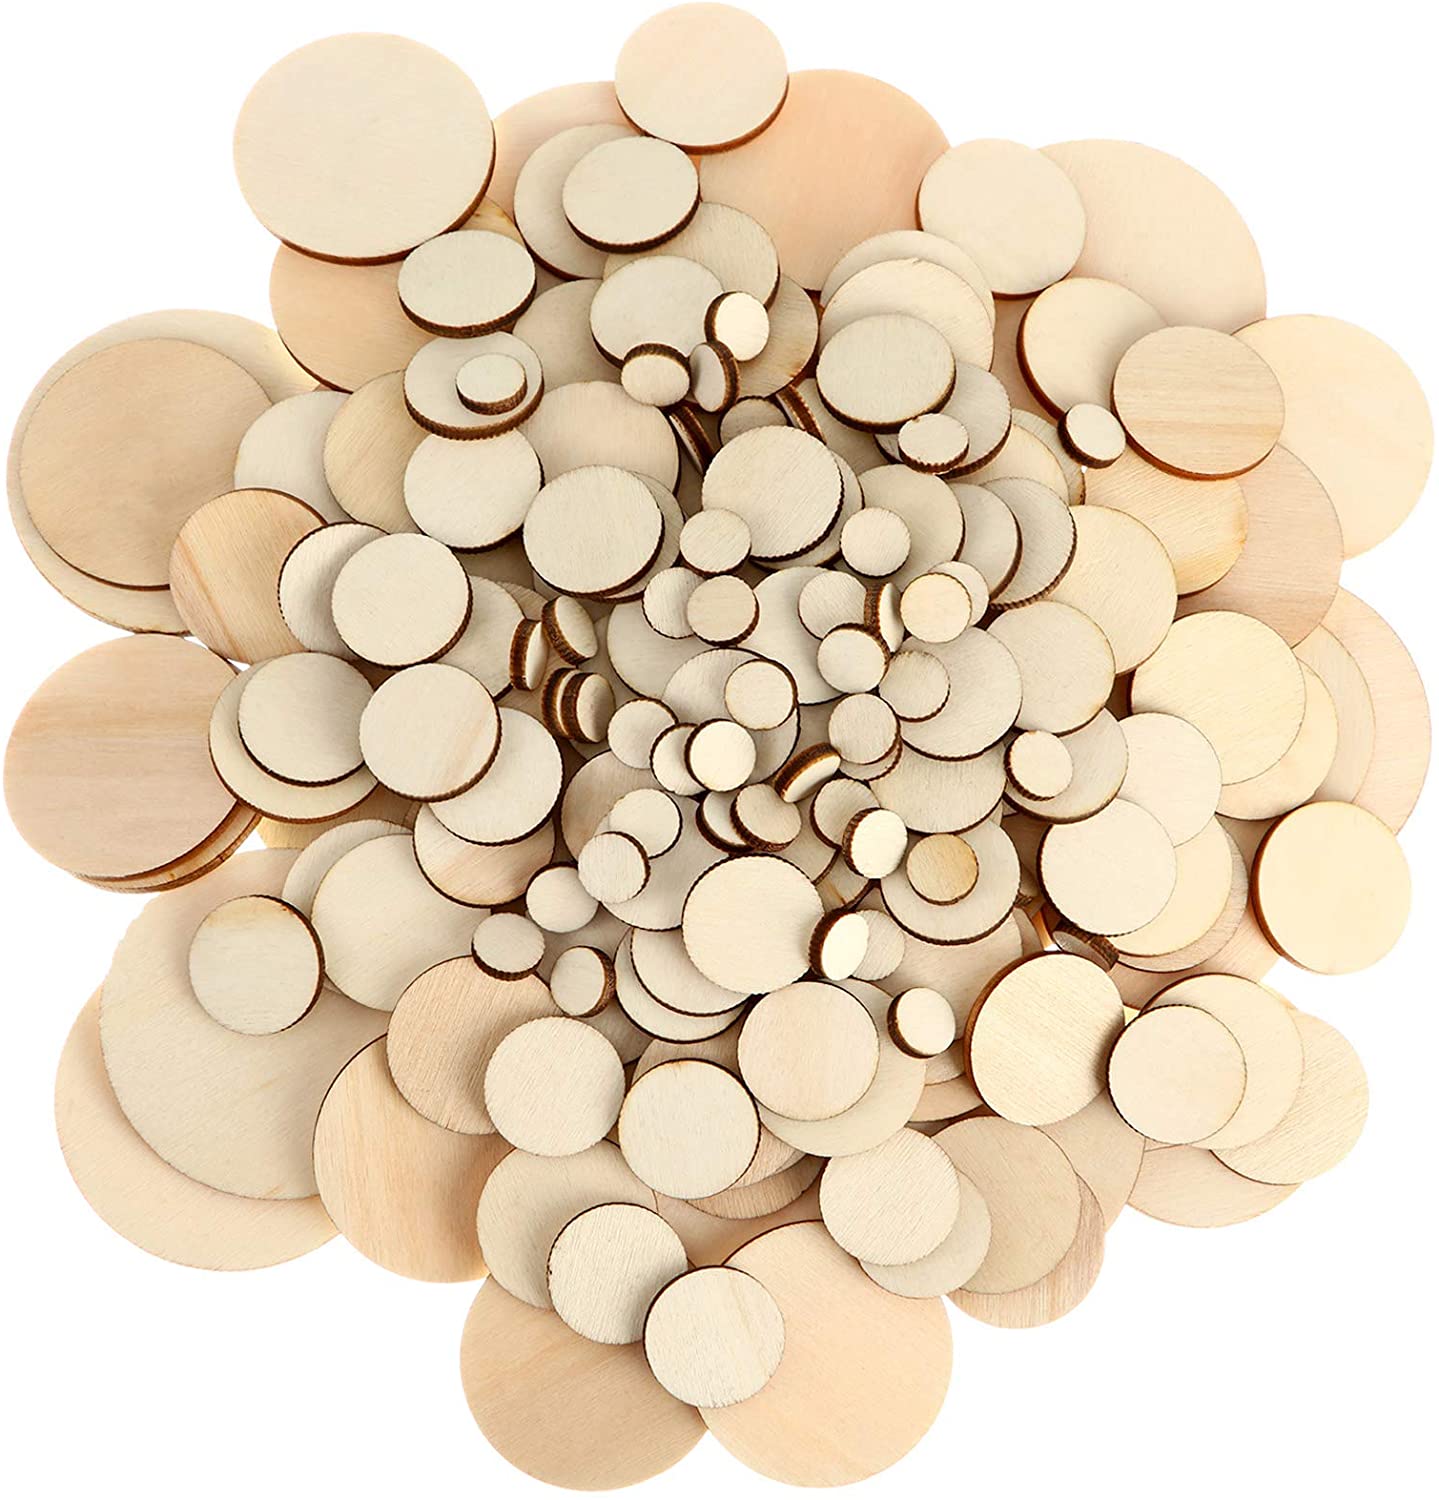 Unfinished Wood Slices Round Wooden Disc Circles Wood Cutouts Ornaments for Craft and Decoration Featured Image